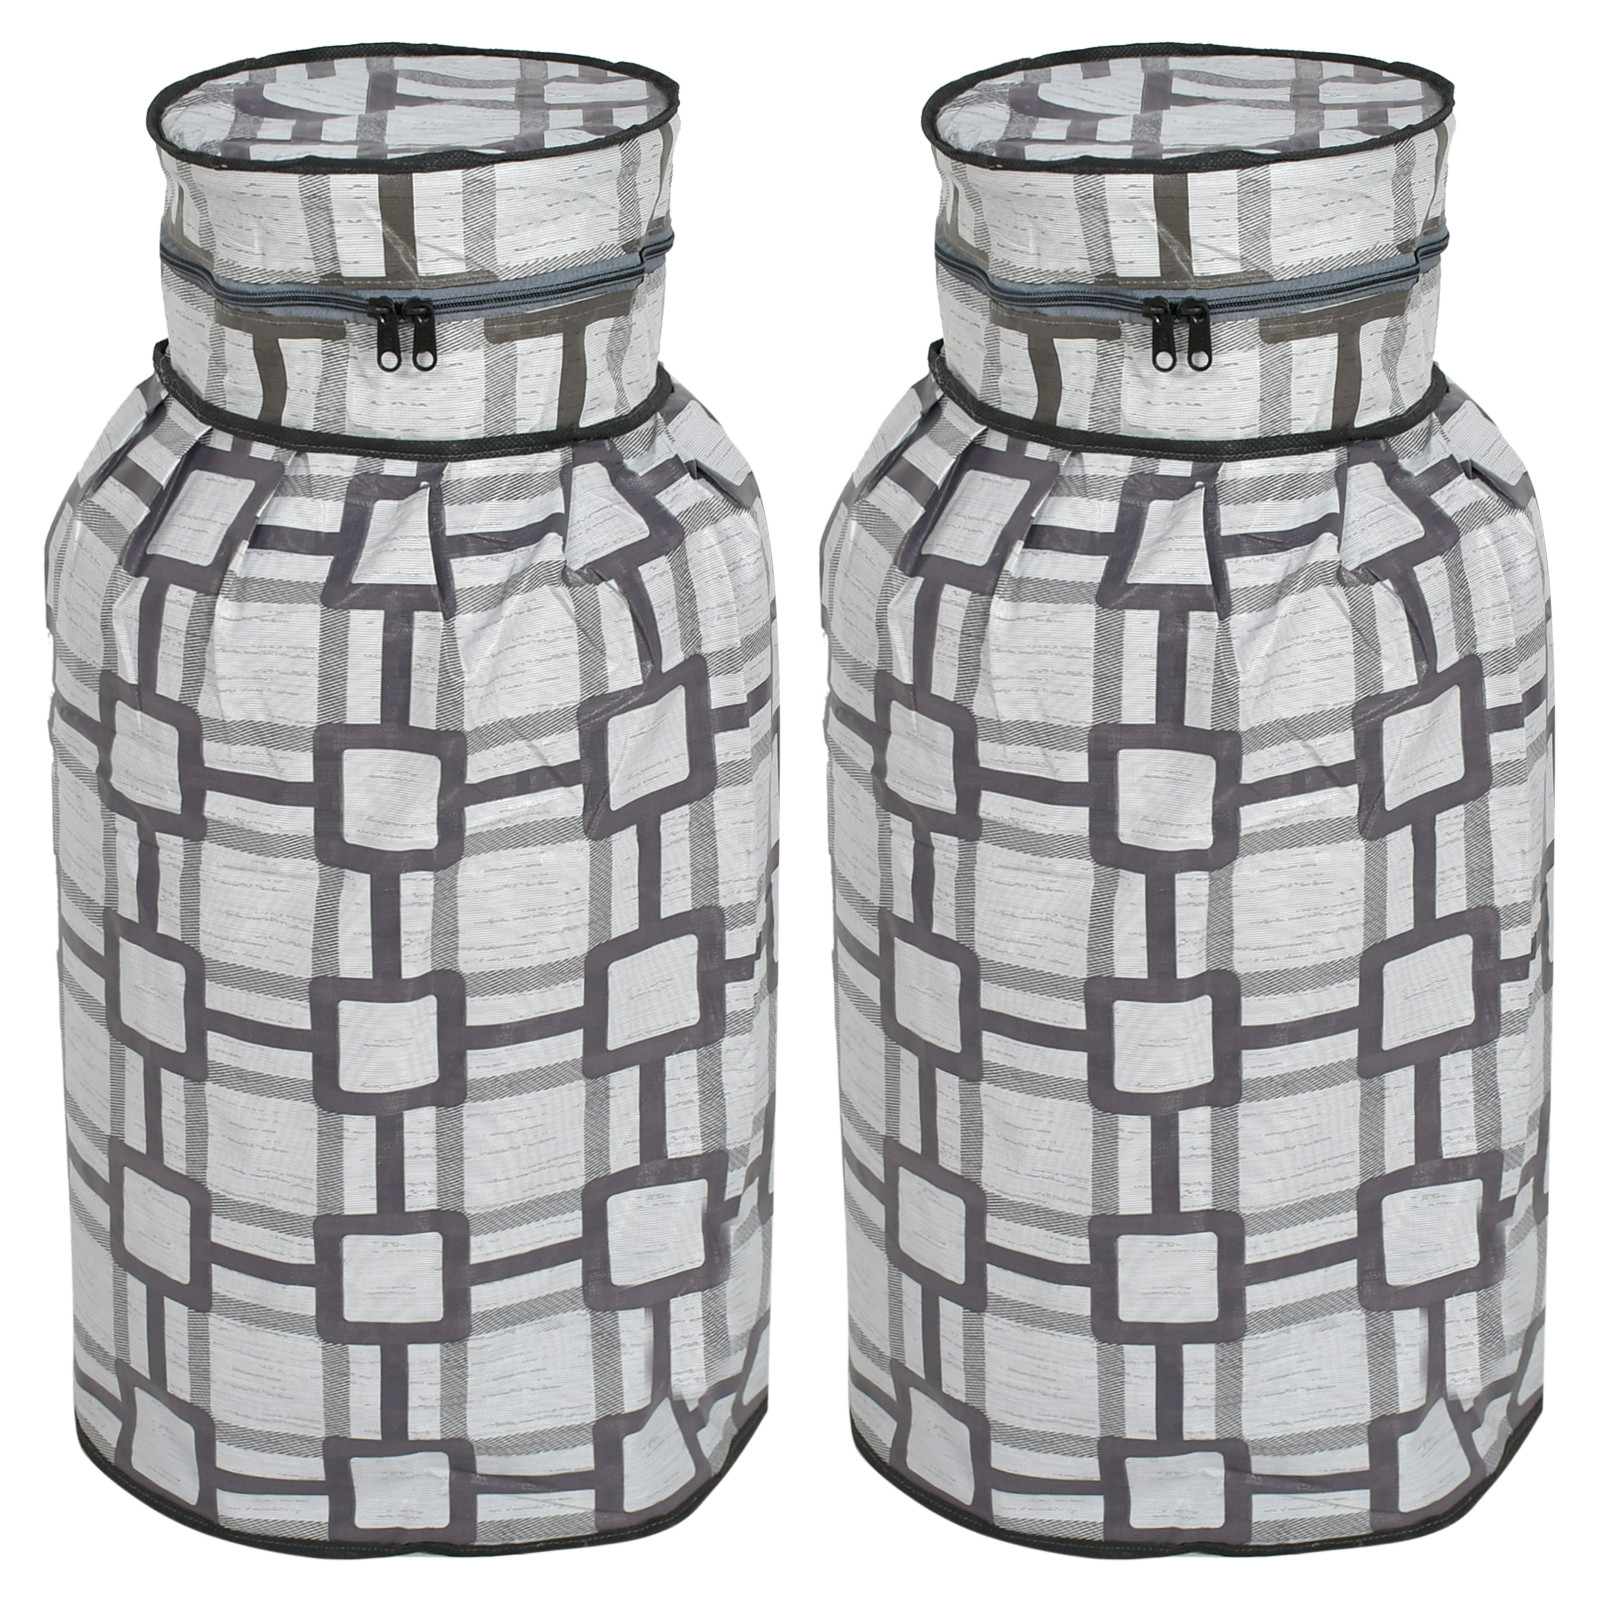 Kuber Industries Square Printed PVC Lpg Gas Cylinder Cover- Pack of 2 (Grey)-HS43KUBMART25627, Standard